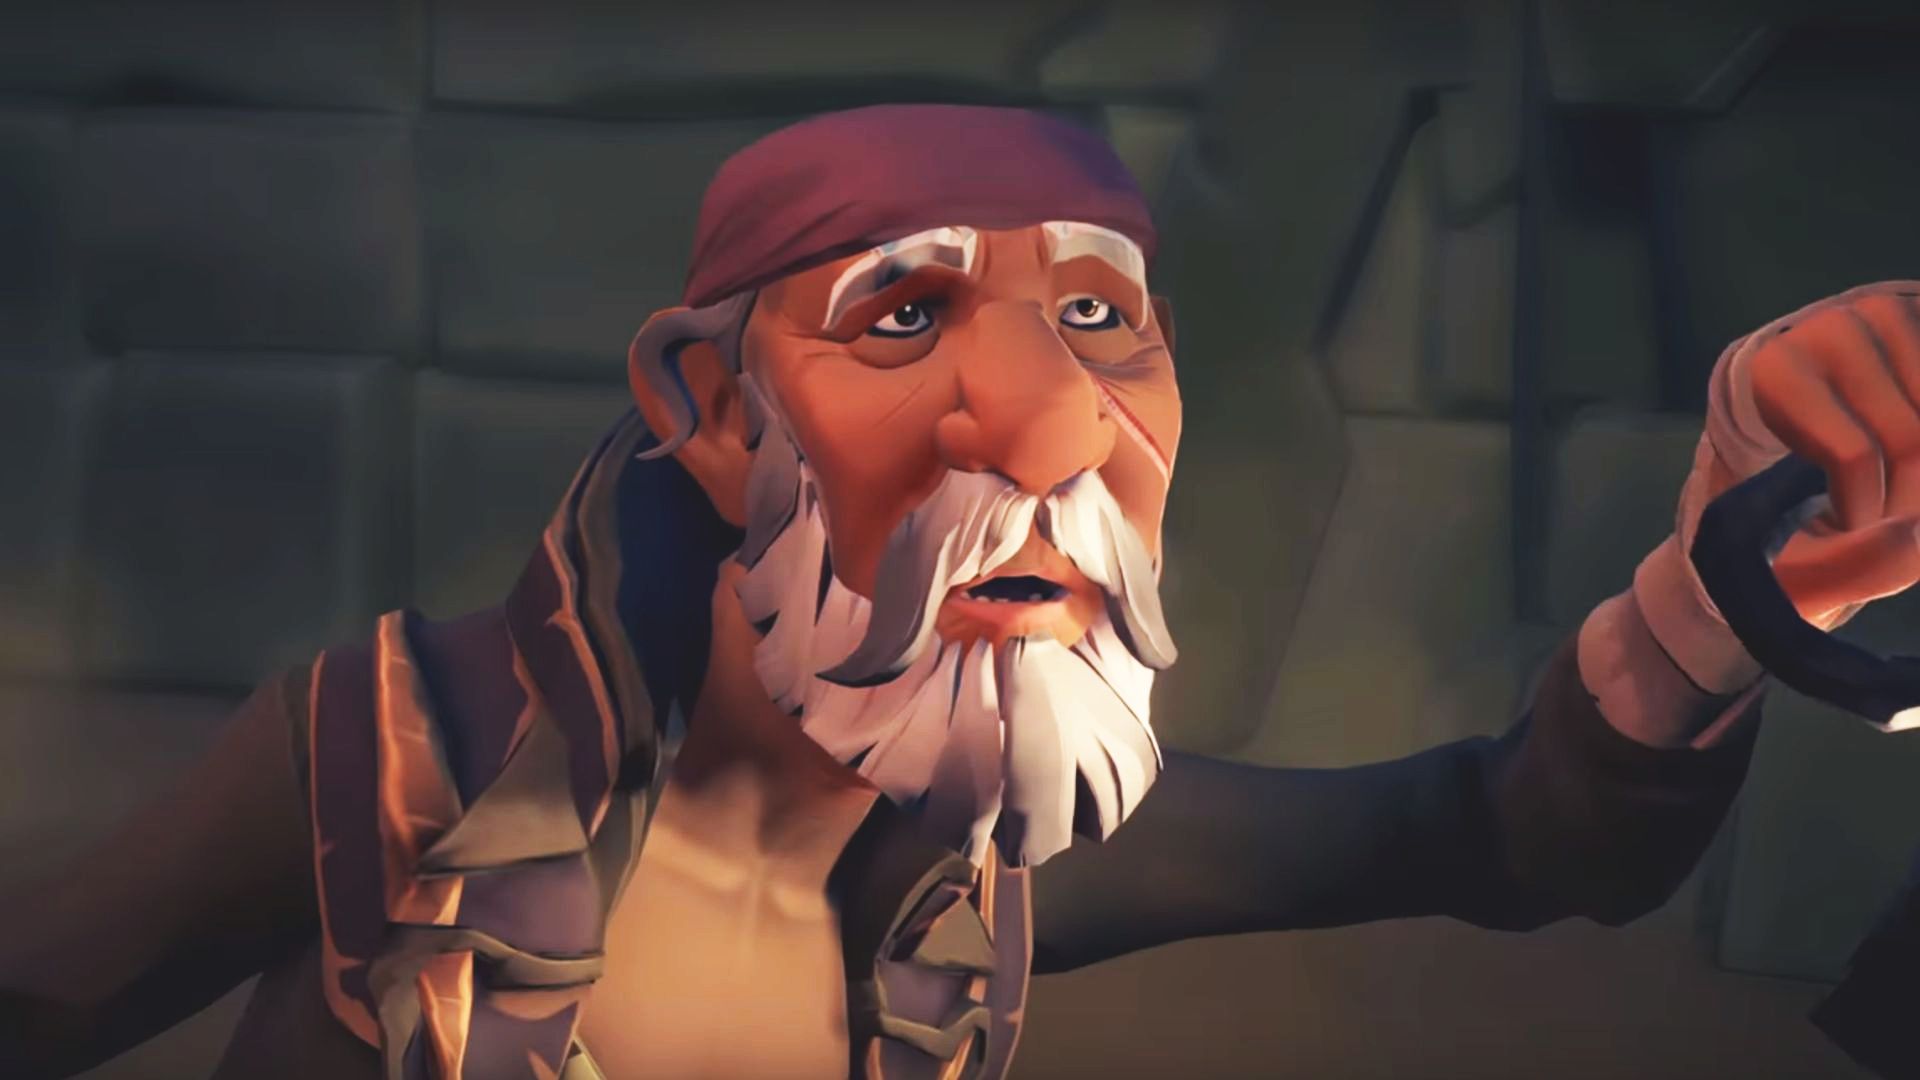 Sea of Thieves is adding private single-crew servers in December